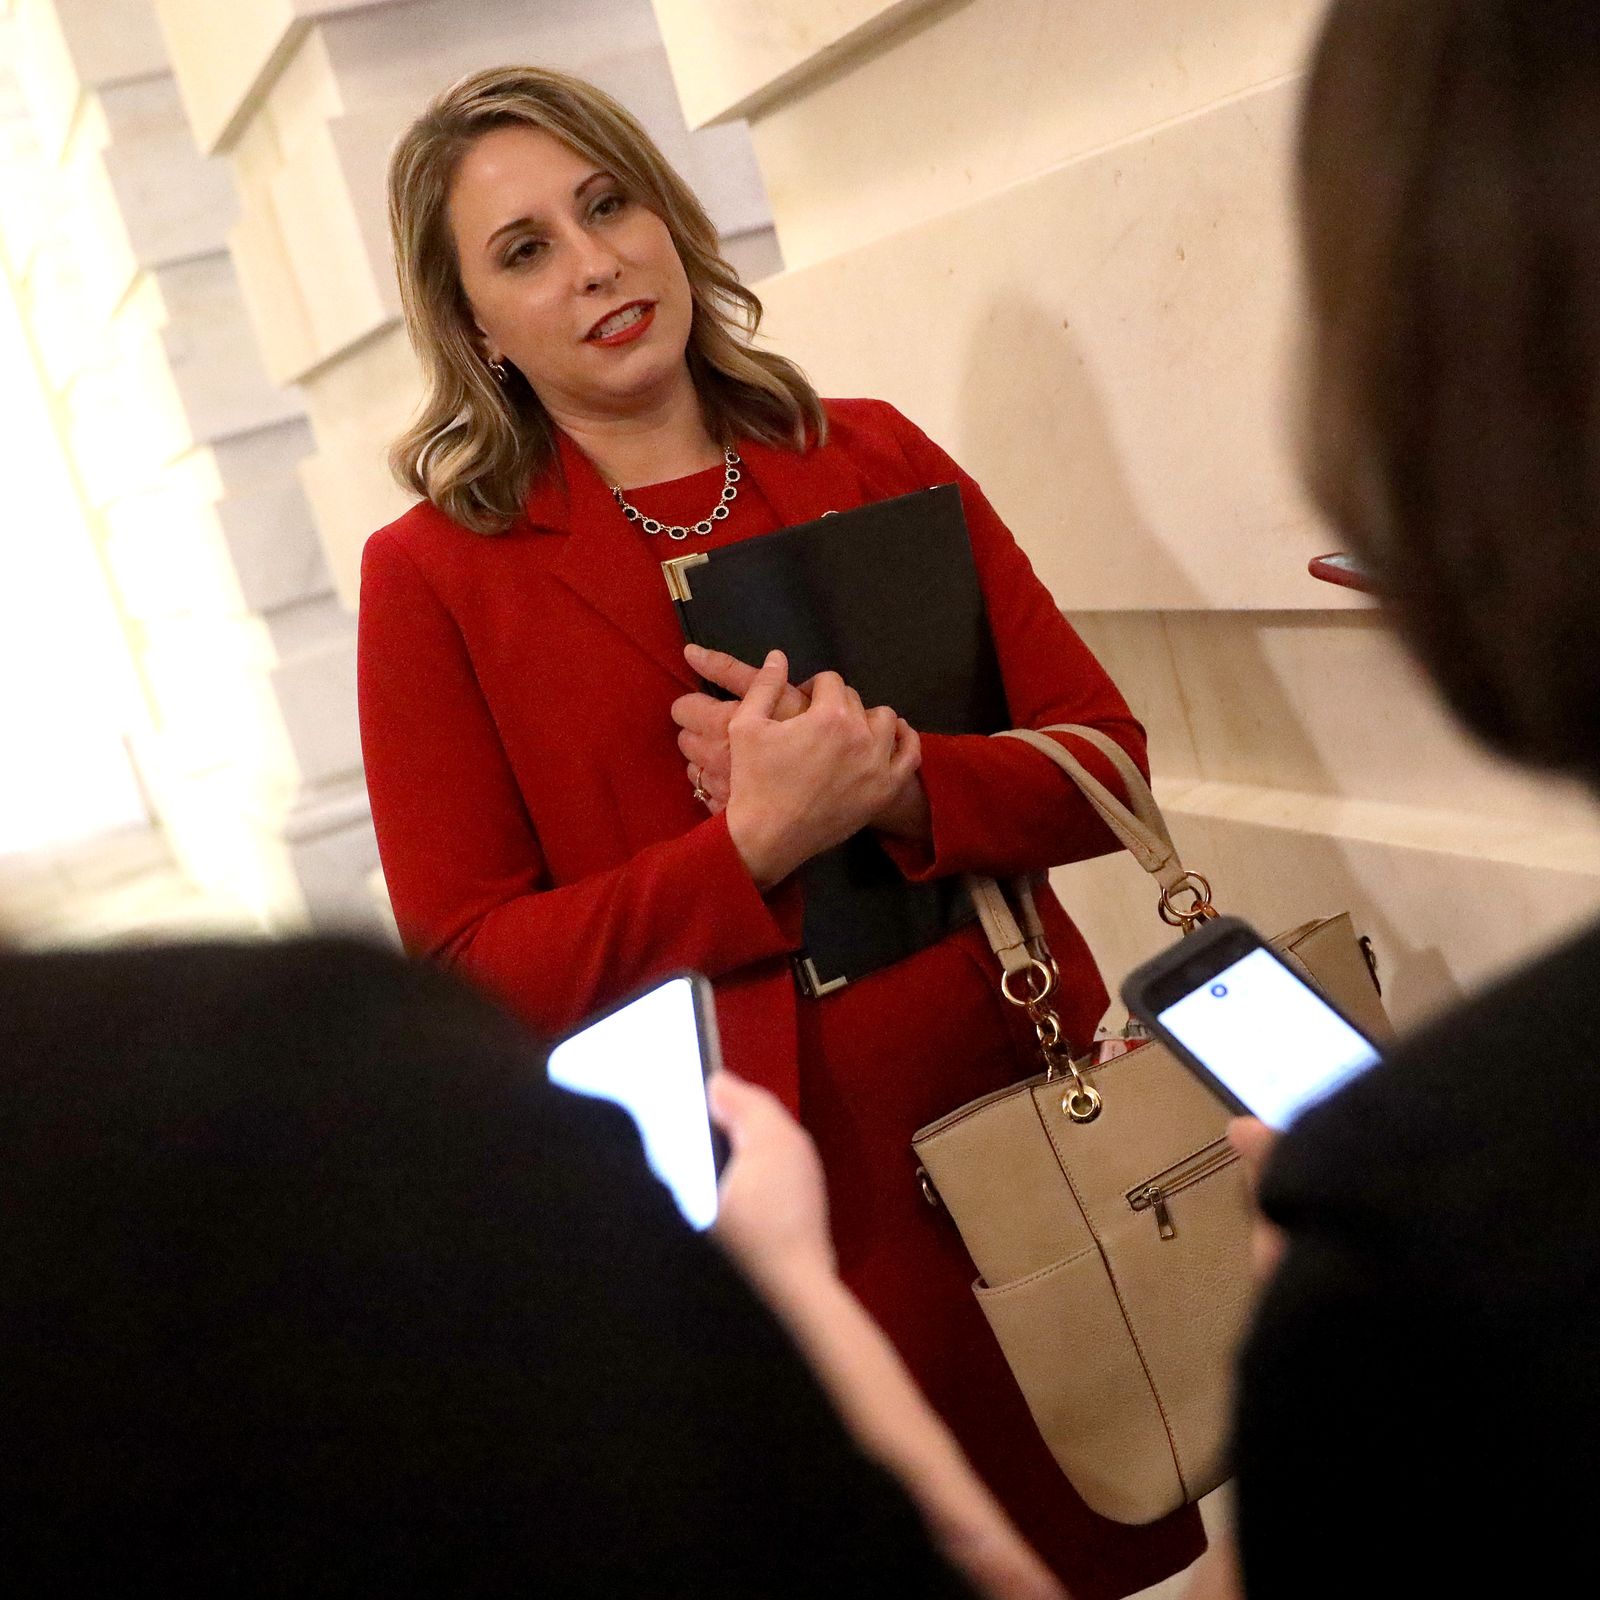 Hq Nudist - Former Rep. Katie Hill loses lawsuit against Daily Mail over nude photos